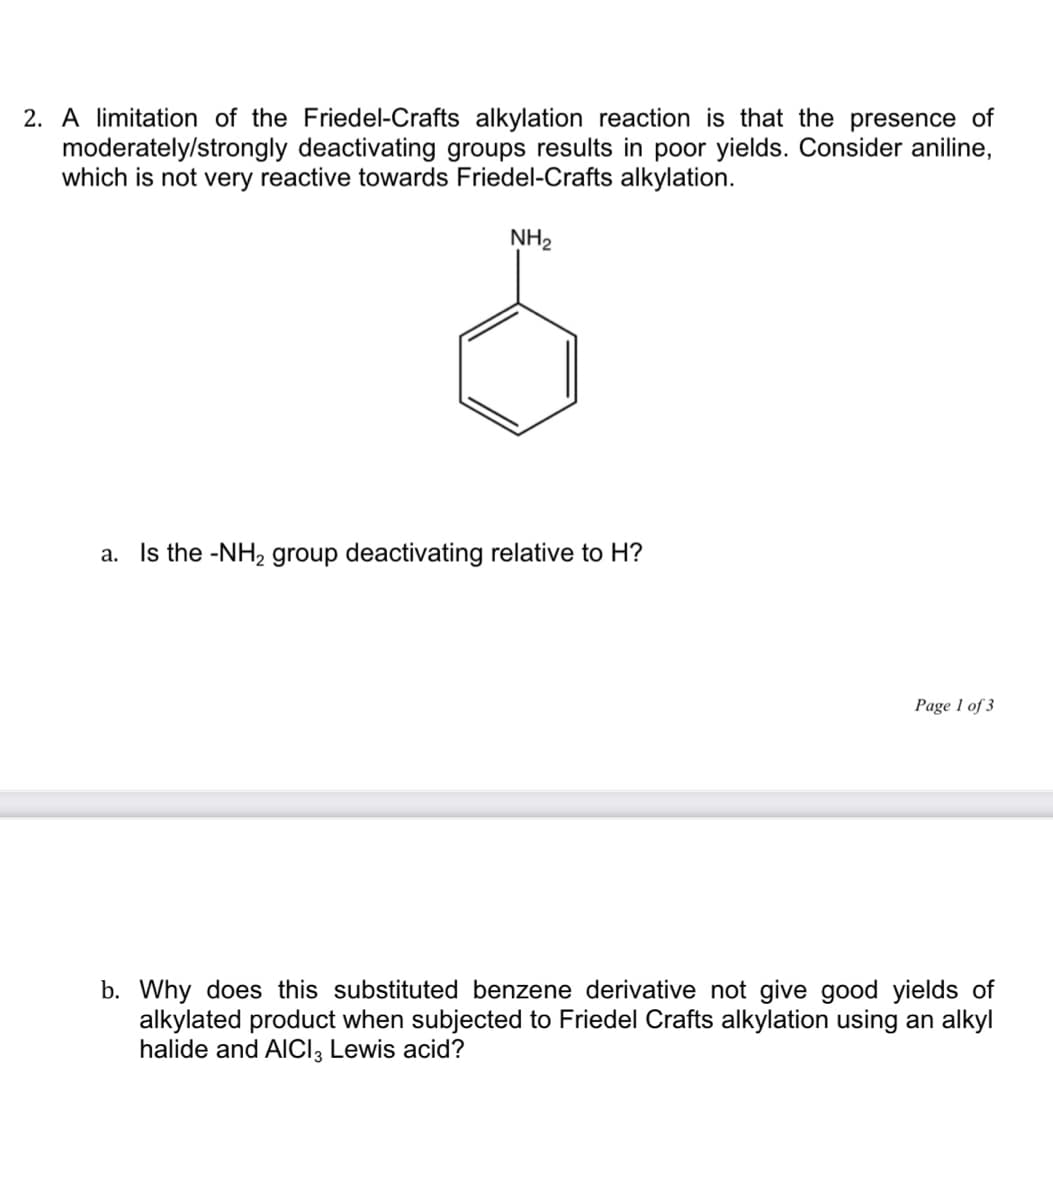 2. A limitation of the Friedel-Crafts alkylation reaction is that the presence of
moderately/strongly deactivating groups results in poor yields. Consider aniline,
which is not very reactive towards Friedel-Crafts alkylation.
NH2
a. Is the -NH2 group deactivating relative to H?
Page 1 of 3
b. Why does this substituted benzene derivative not give good yields of
alkylated product when subjected to Friedel Crafts alkylation using an alkyl
halide and AICI, Lewis acid?
